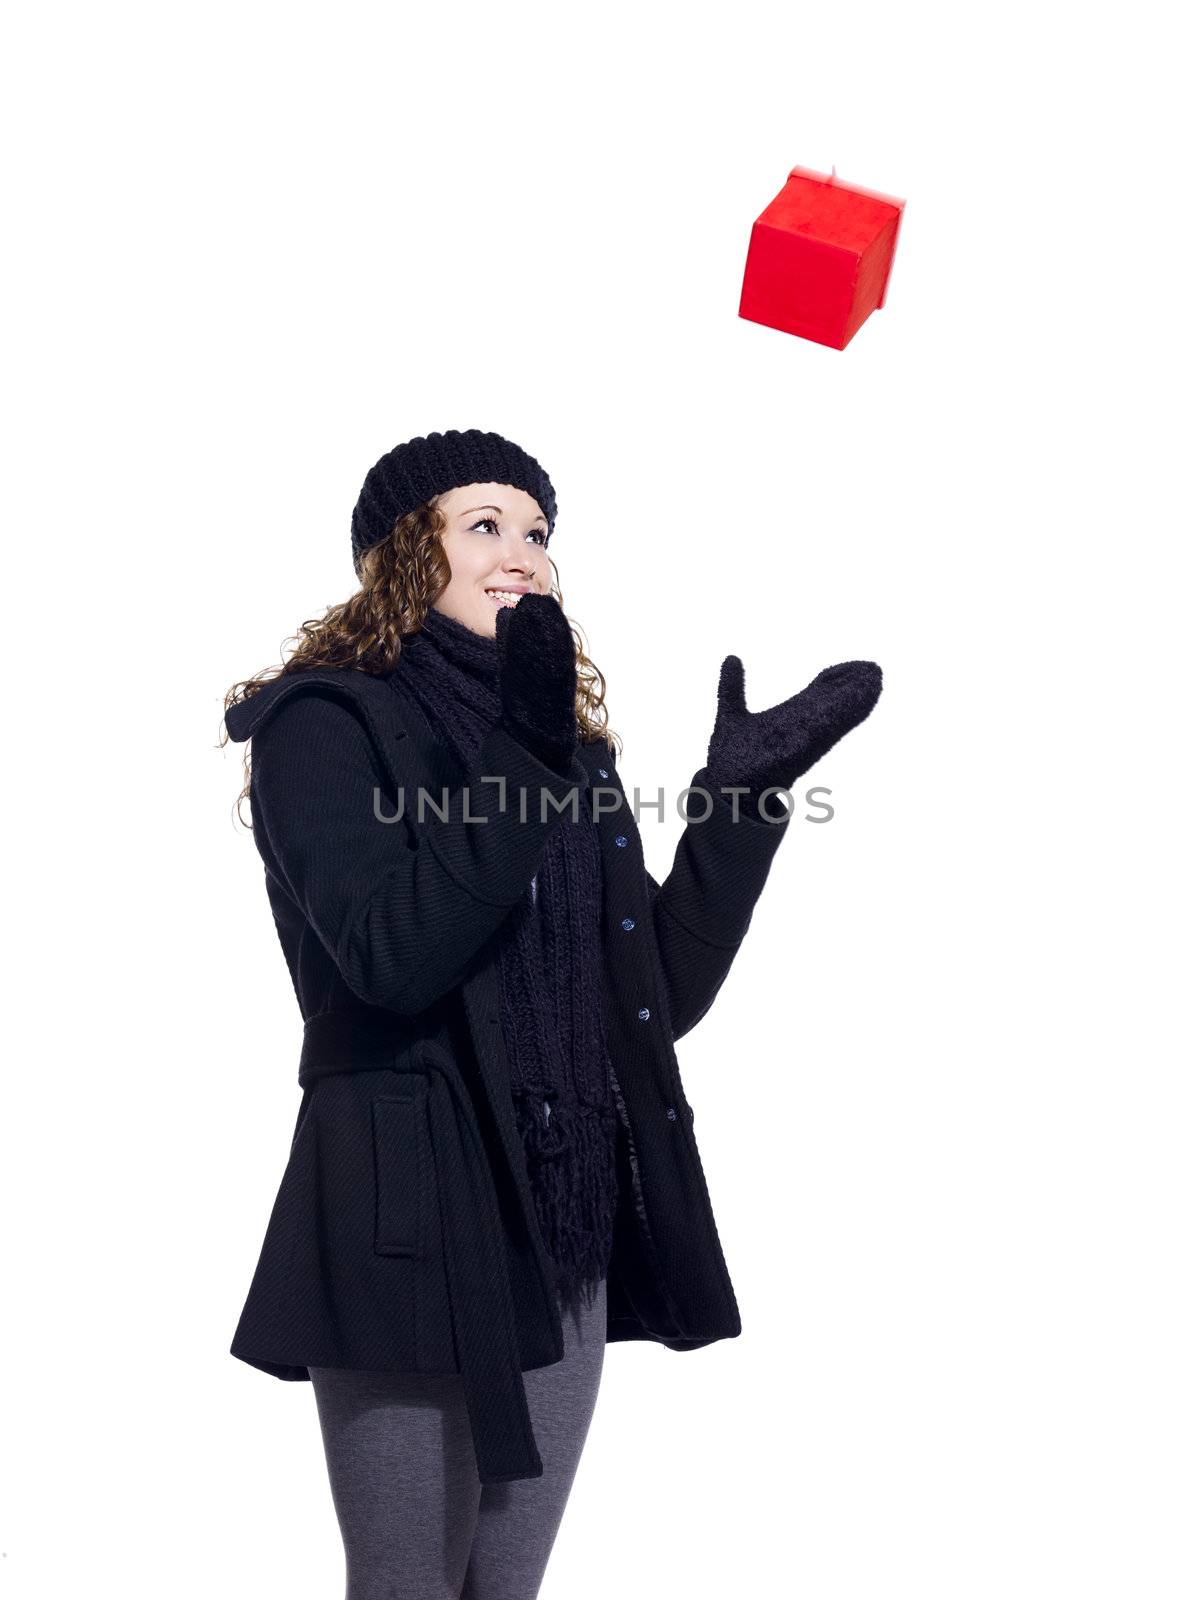 Cheerful young woman playing with her Christmas present over white background, Model: Brittany Beaudoin